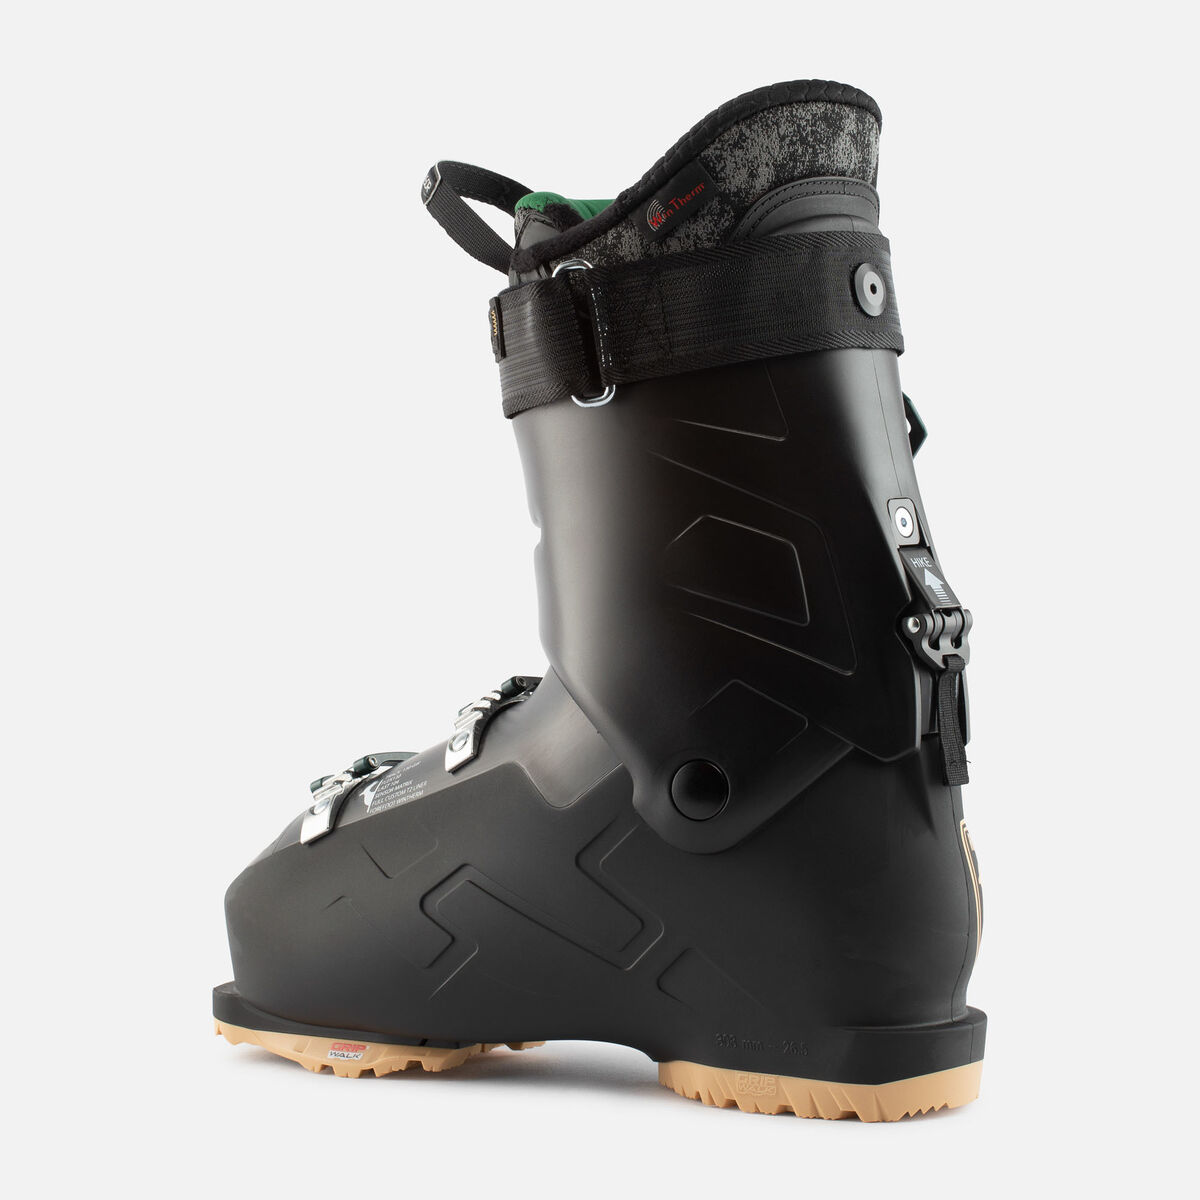 Chaussures de ski All Mountain Homme Track 130 Gw